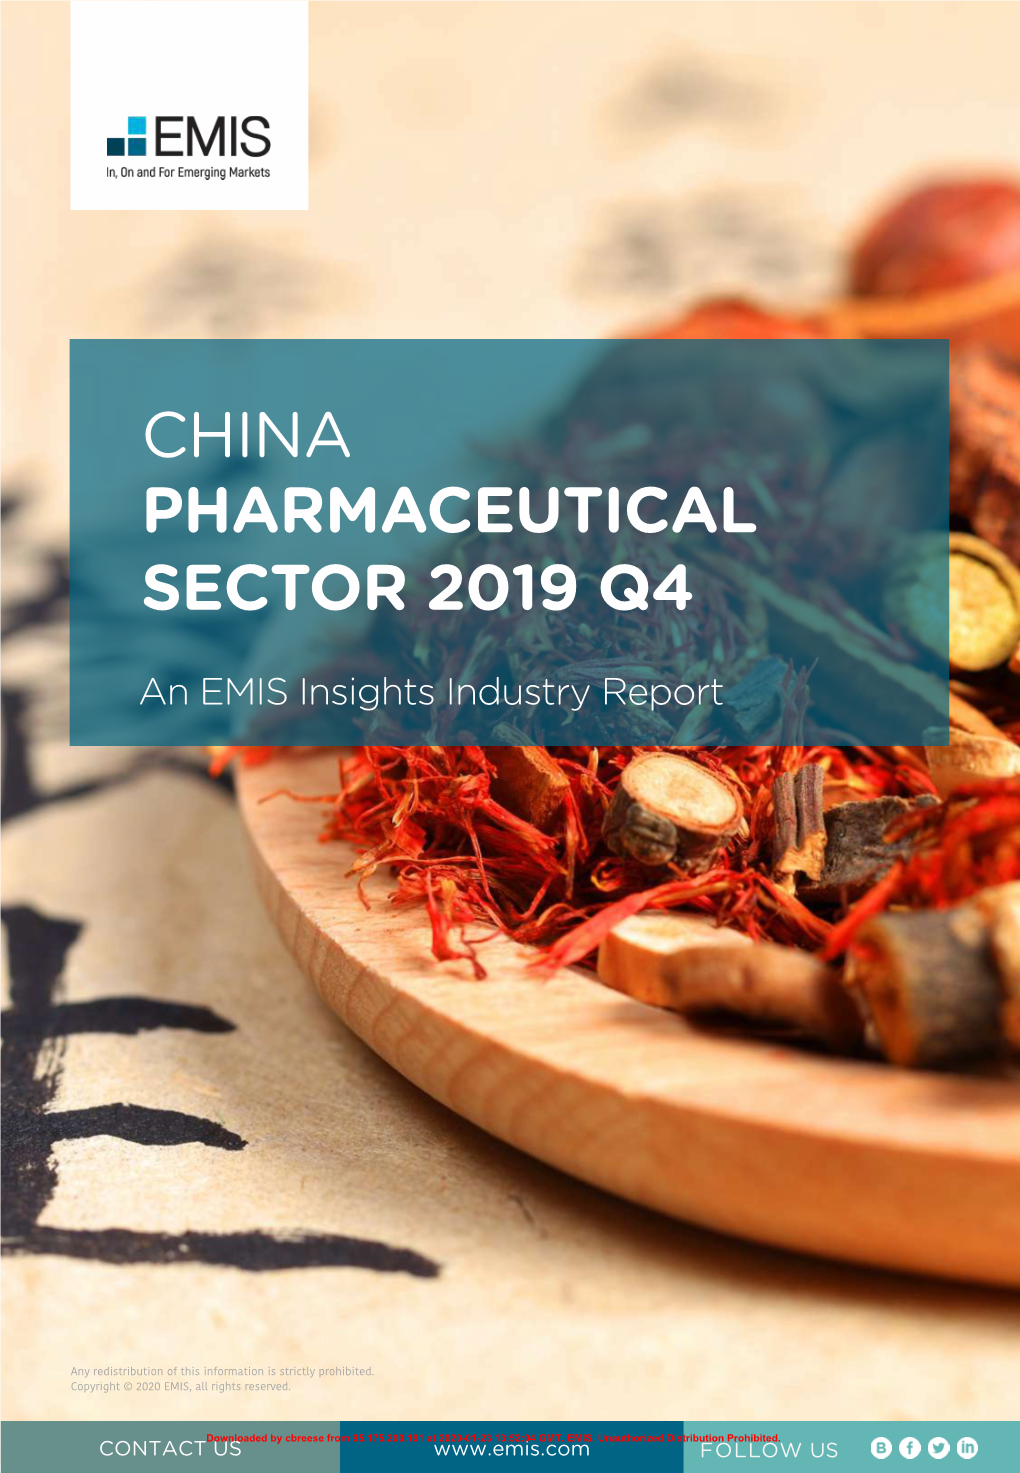 China Pharmaceutical Sector 2019 Q4